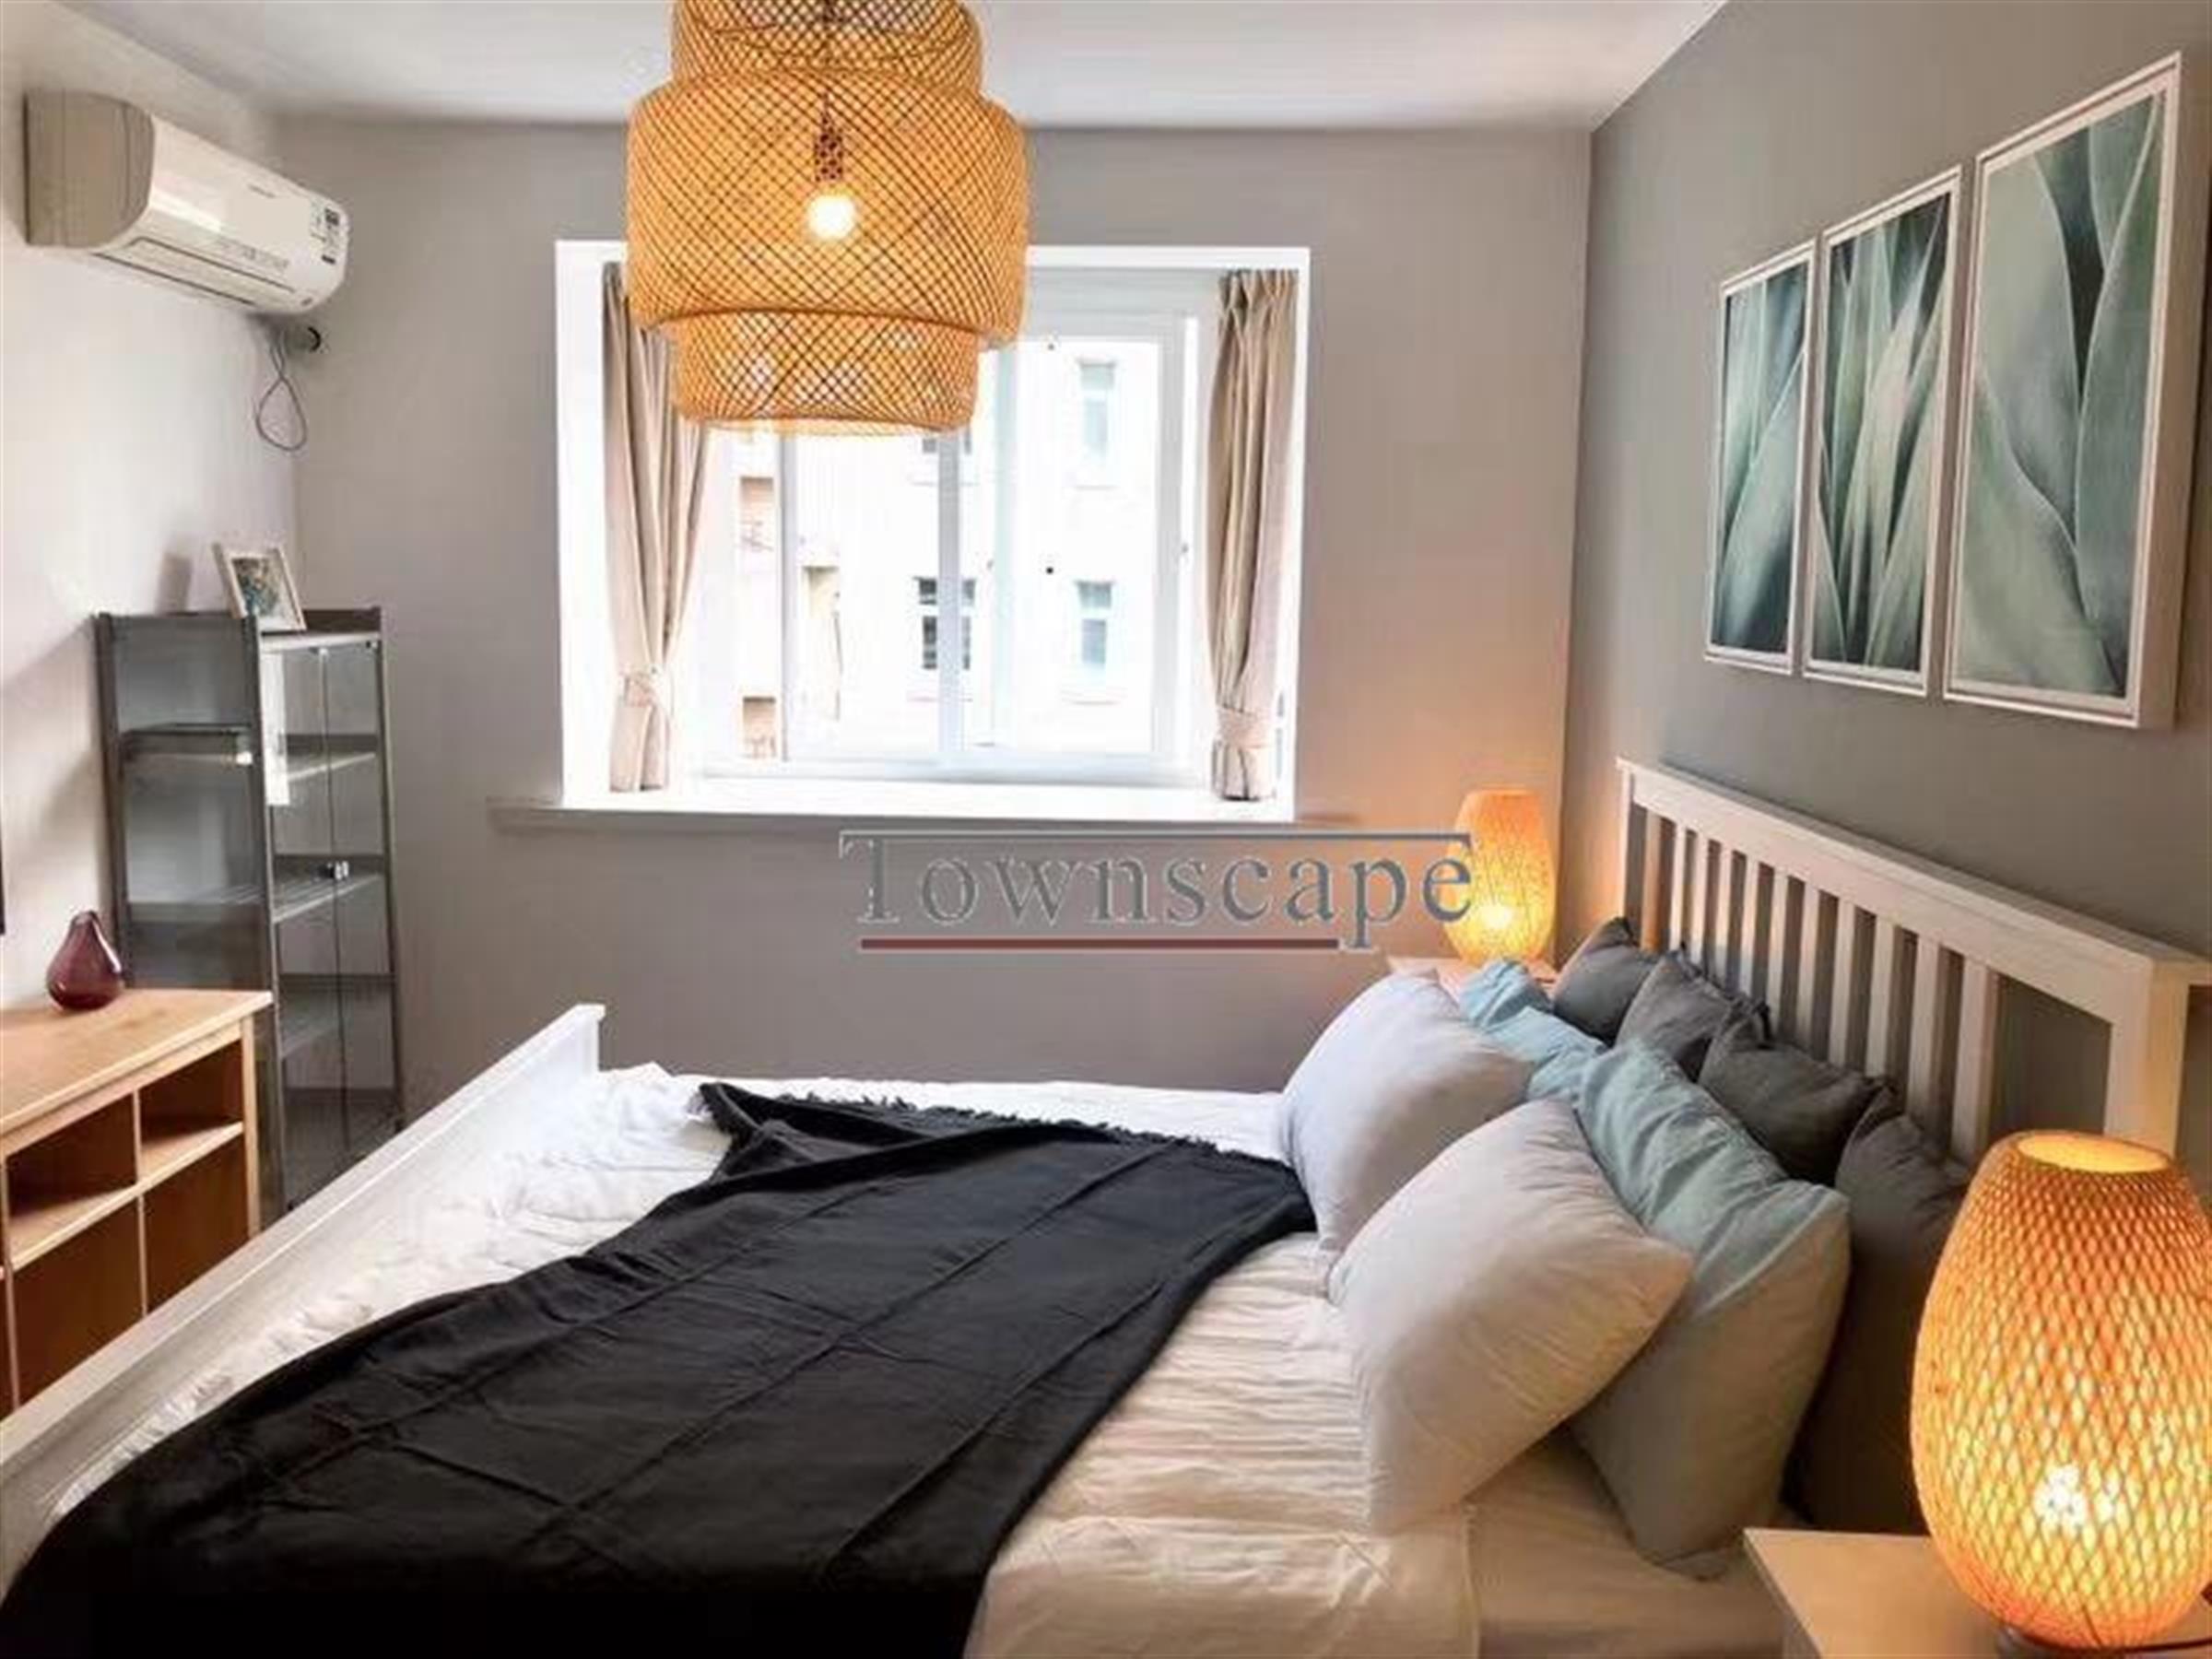 Sunny bedroom Newly Renovated Spacious FFC Apartment for Rent in Shanghai